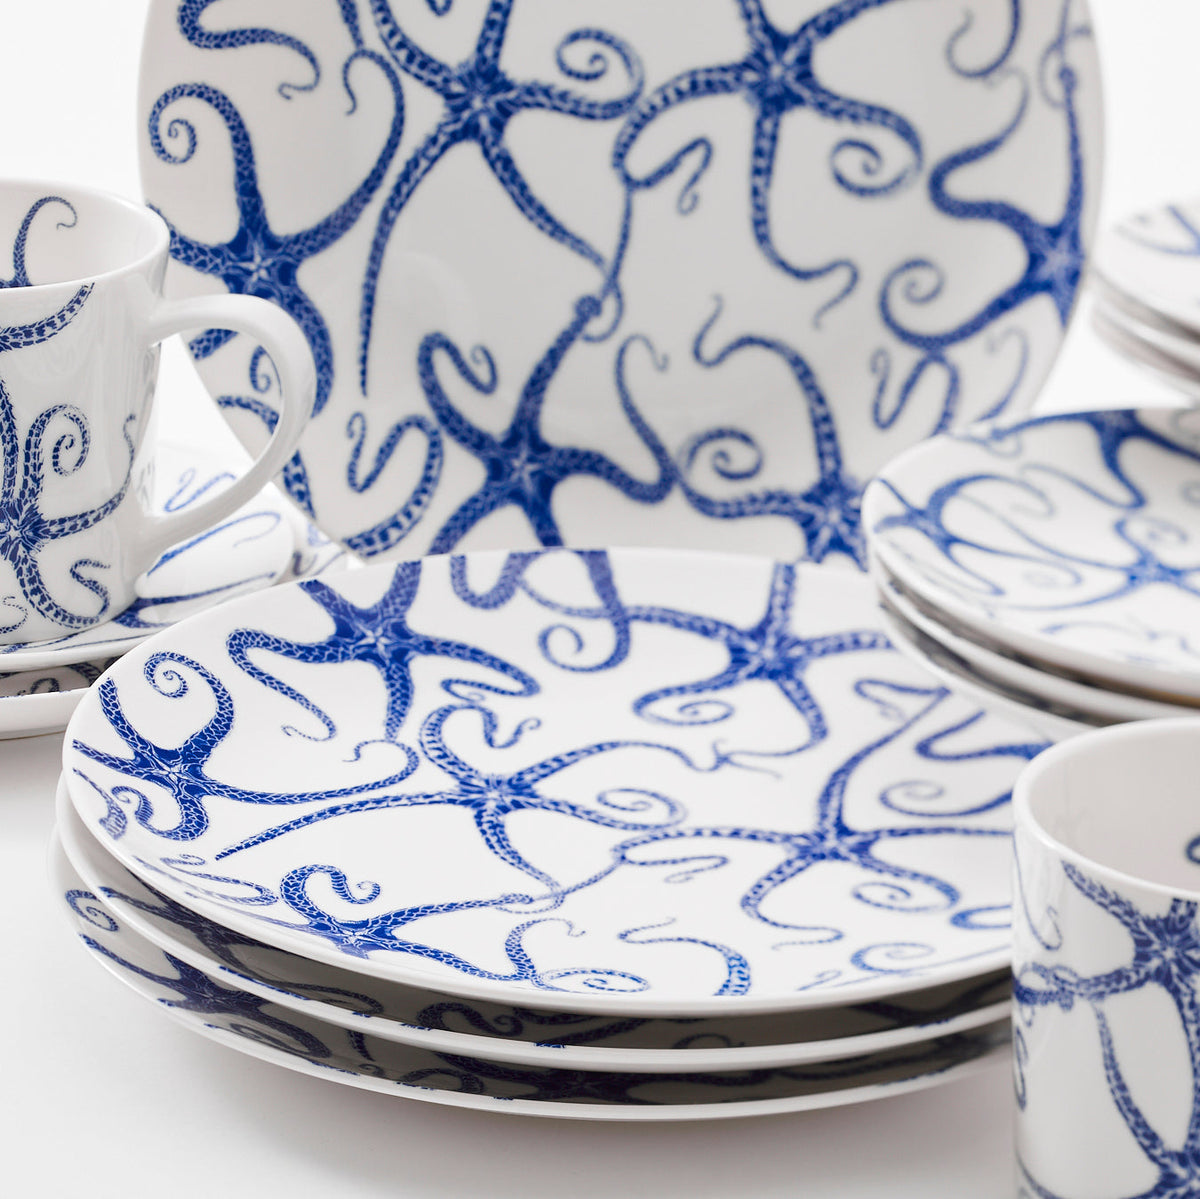 A Starfish Table for 4 dinnerware set by Caskata featuring blue and white starfish designs perfect for dressing up your table.